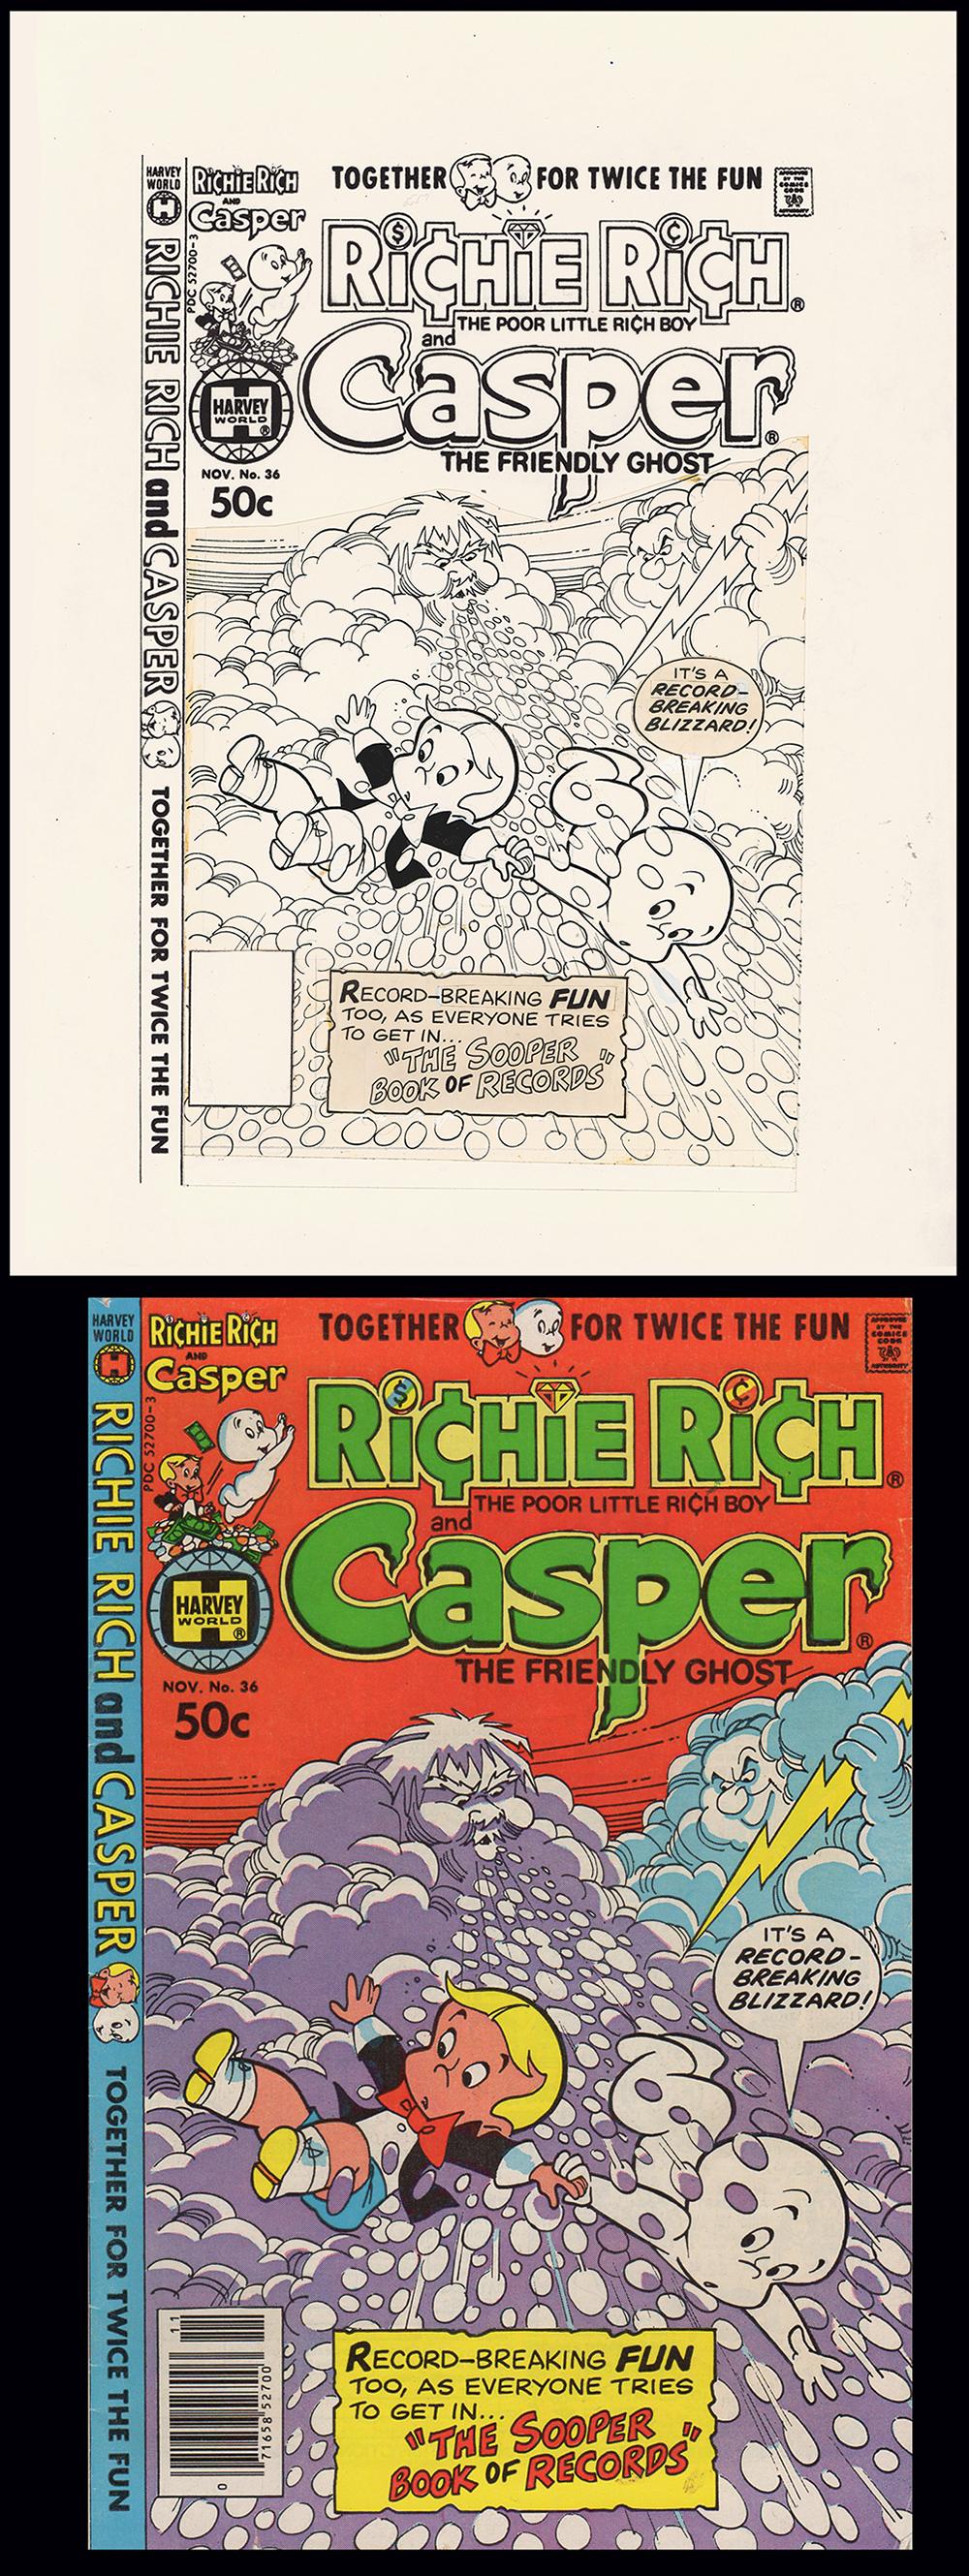 Image: Richie Rich and Casper the Friendly Ghost #36 Cover art by Warren Kremer